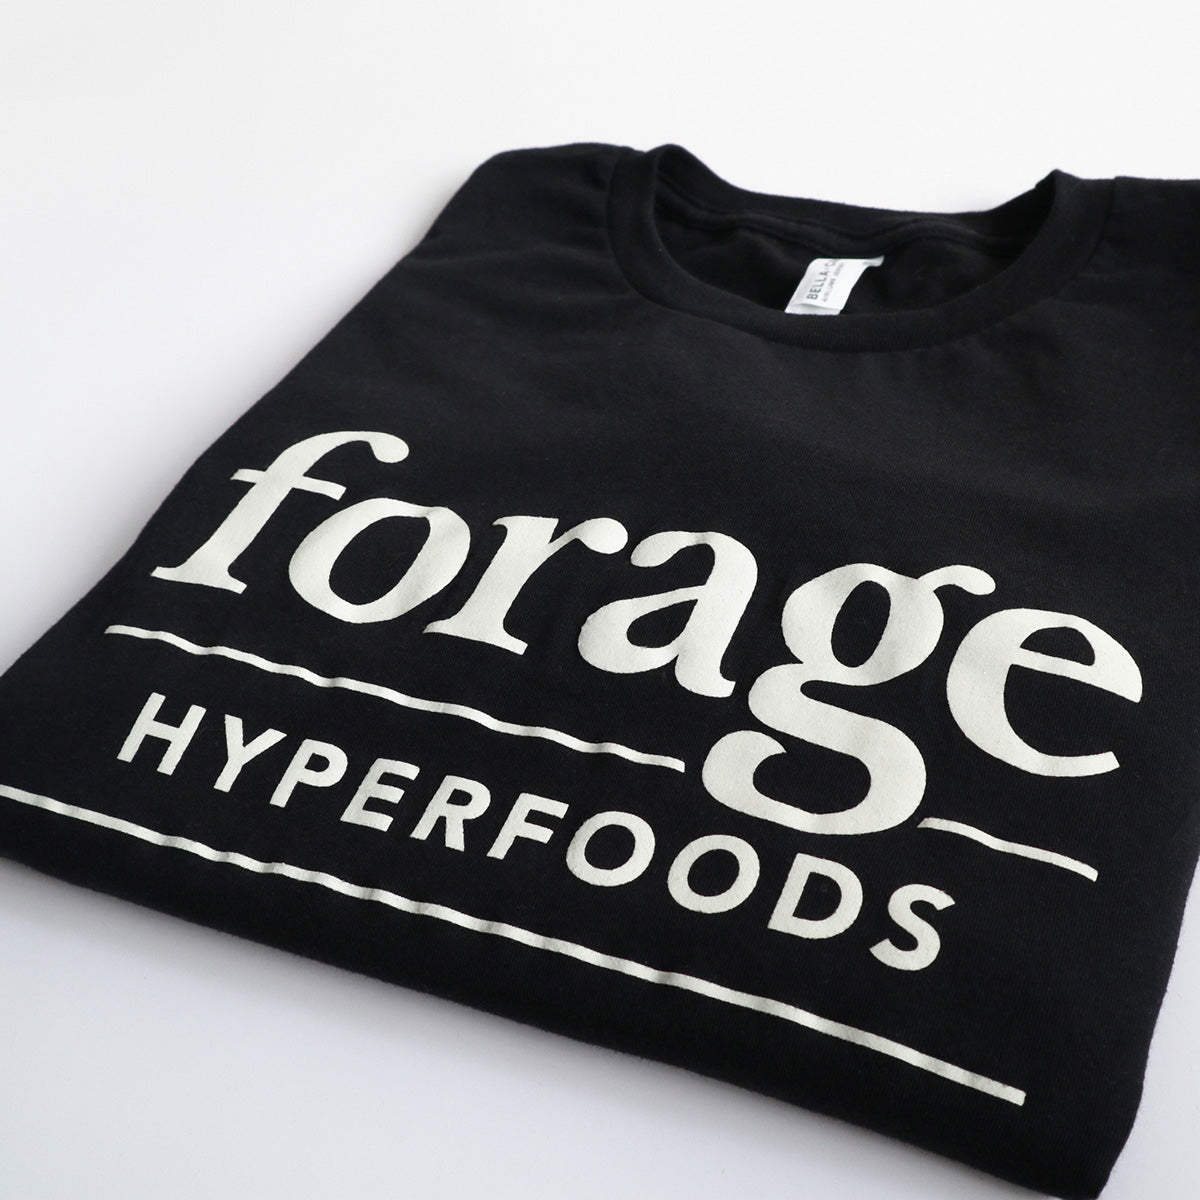 A black shirt with the word mark "Forage Hyperfoods" printed on it in white. It is laid out flat on a white background.  It is folded. 